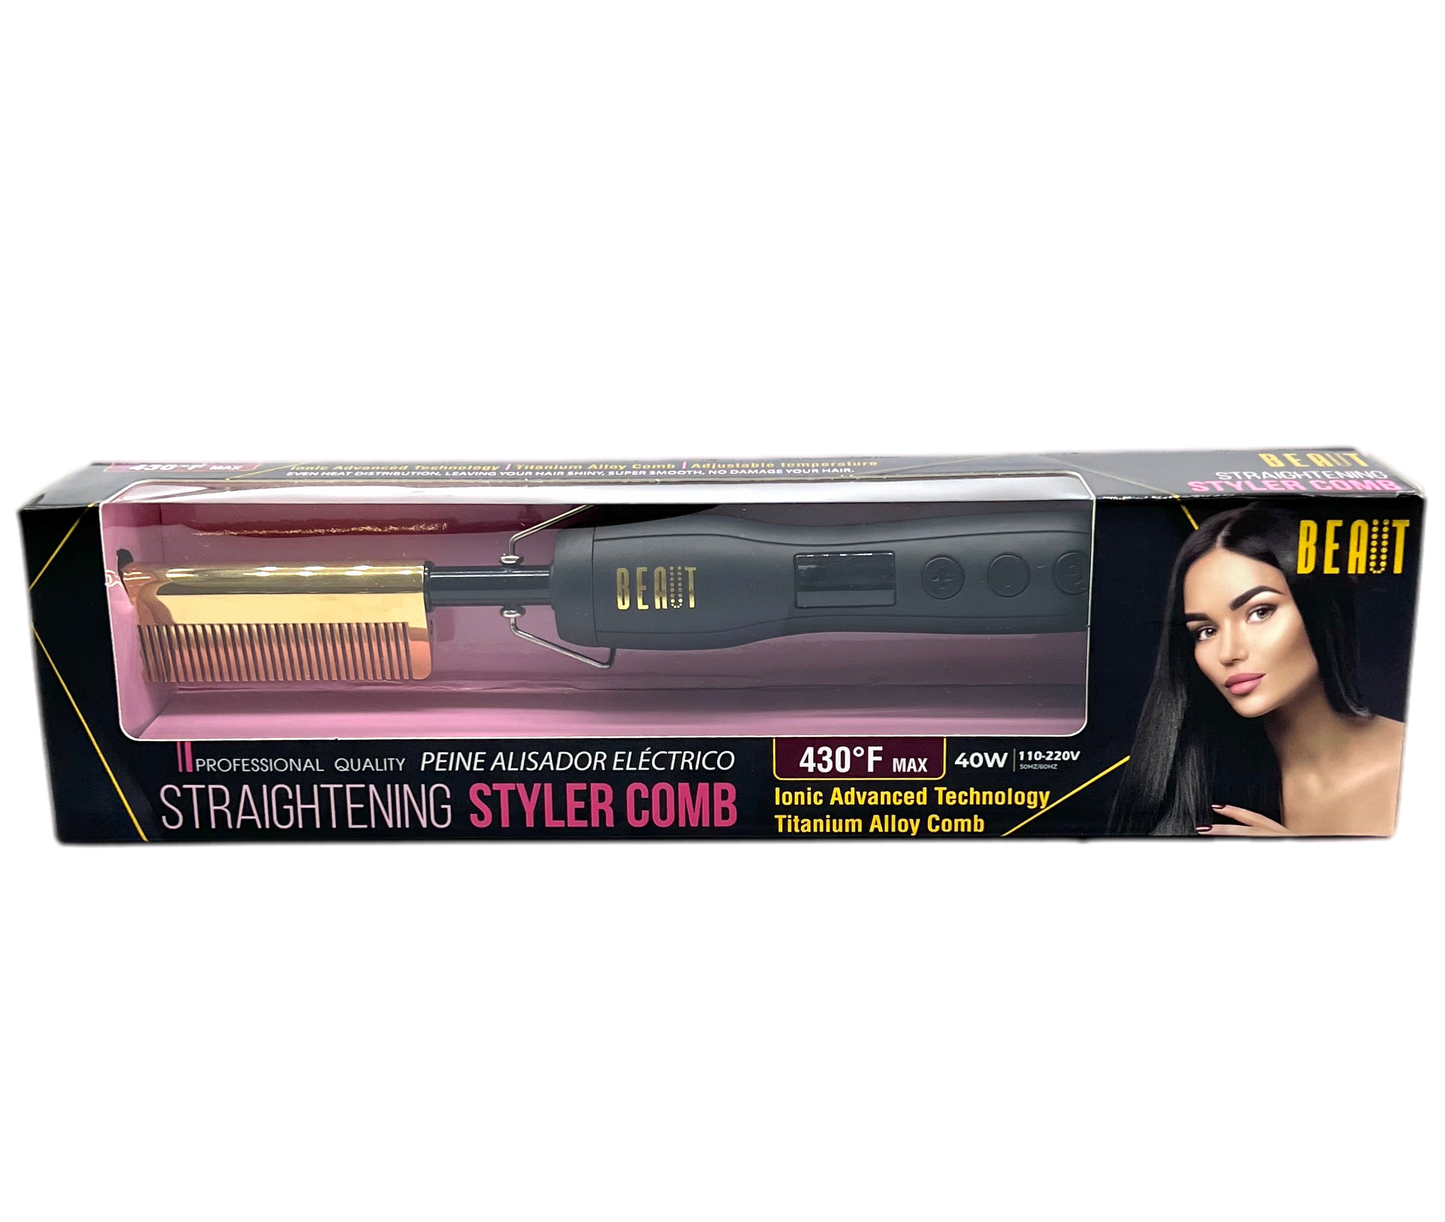 BEAUT  Straightening Styler Comb 430 °F max - VIP Extensions